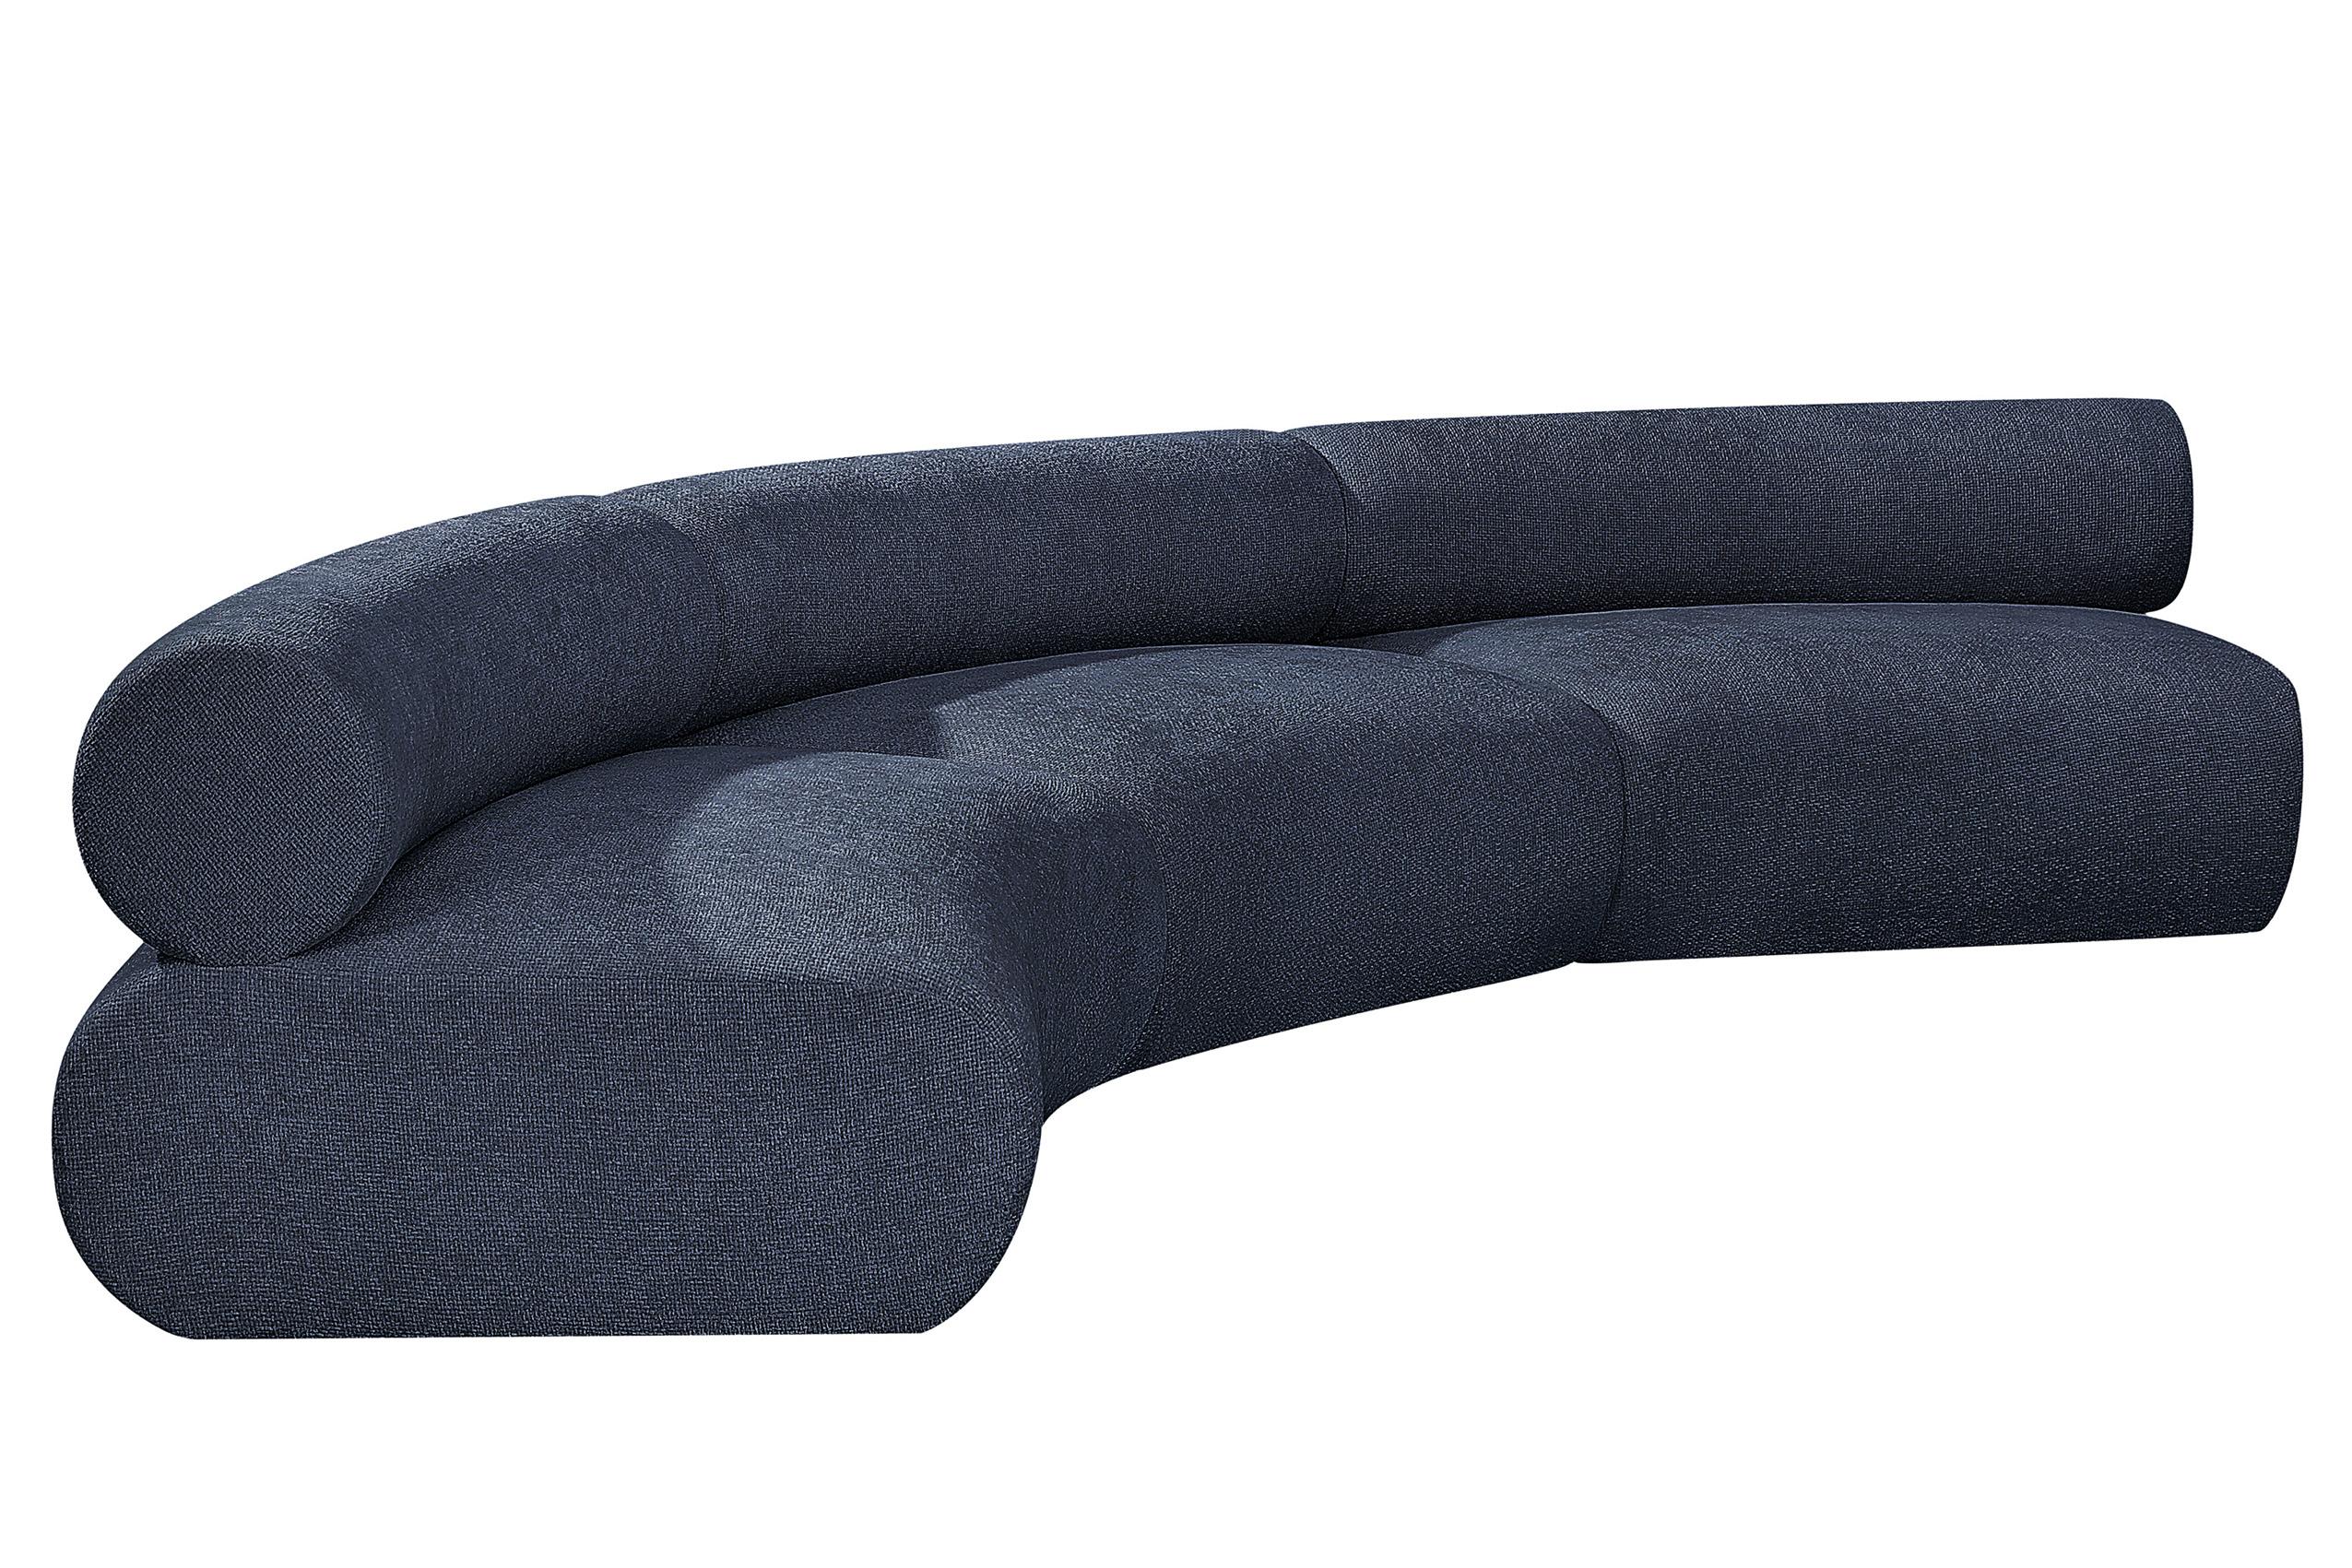 Contemporary, Modern Modular Sectional Sofa Bale 114Navy-S3A 114Navy-S3A in Navy Chenille